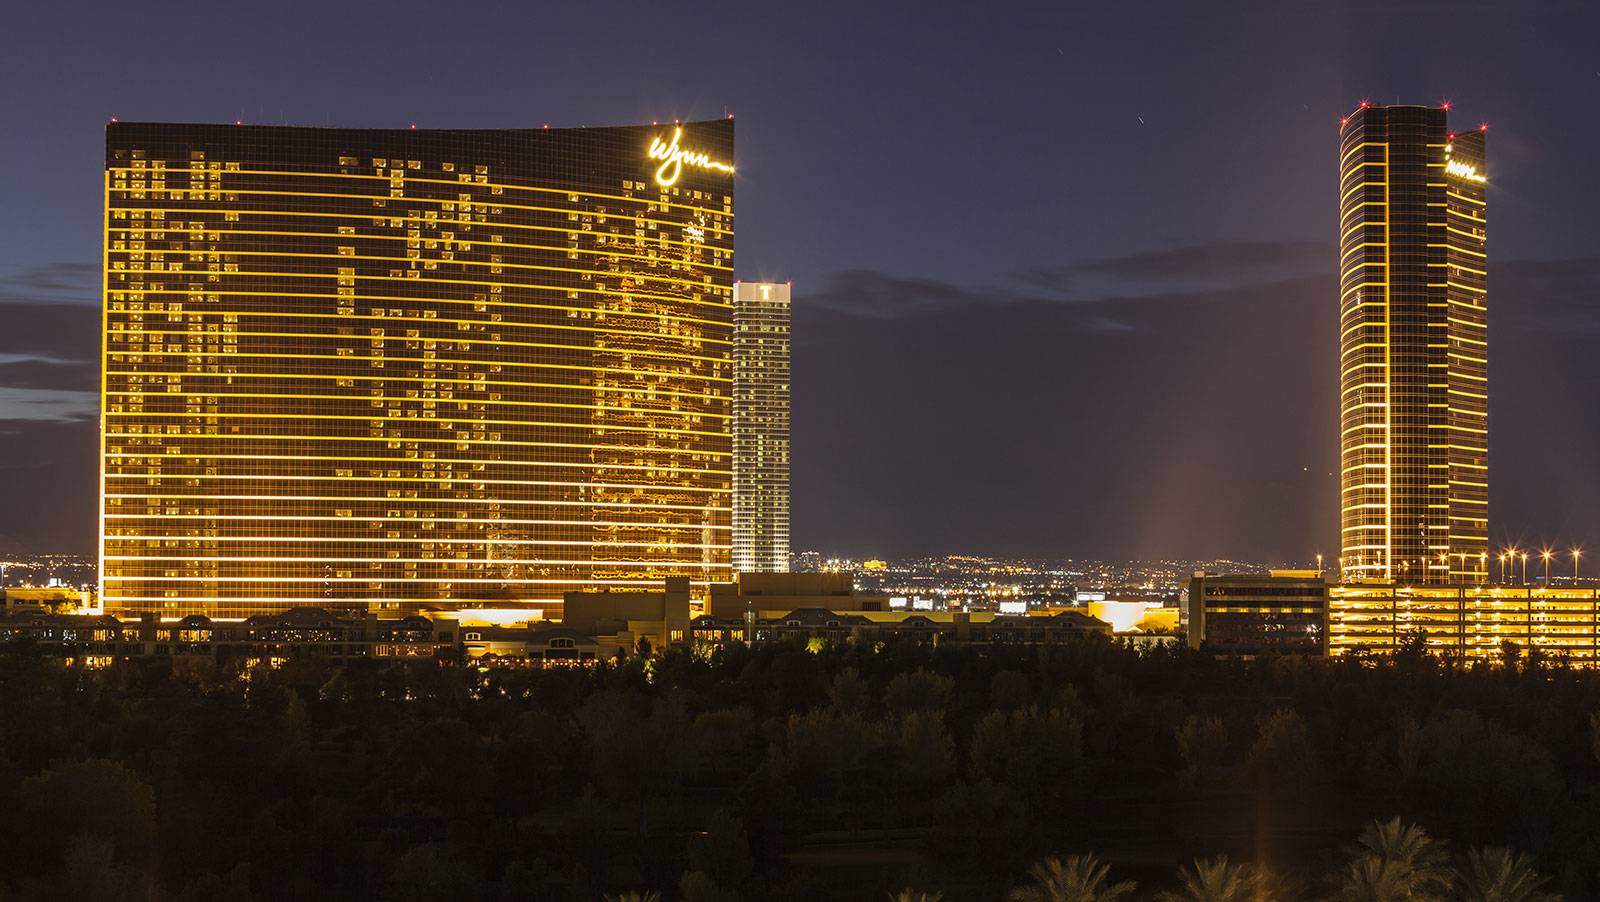 Galaxy’s Wynn Investment Is Good News, But Doesn’t Make Either A Buy